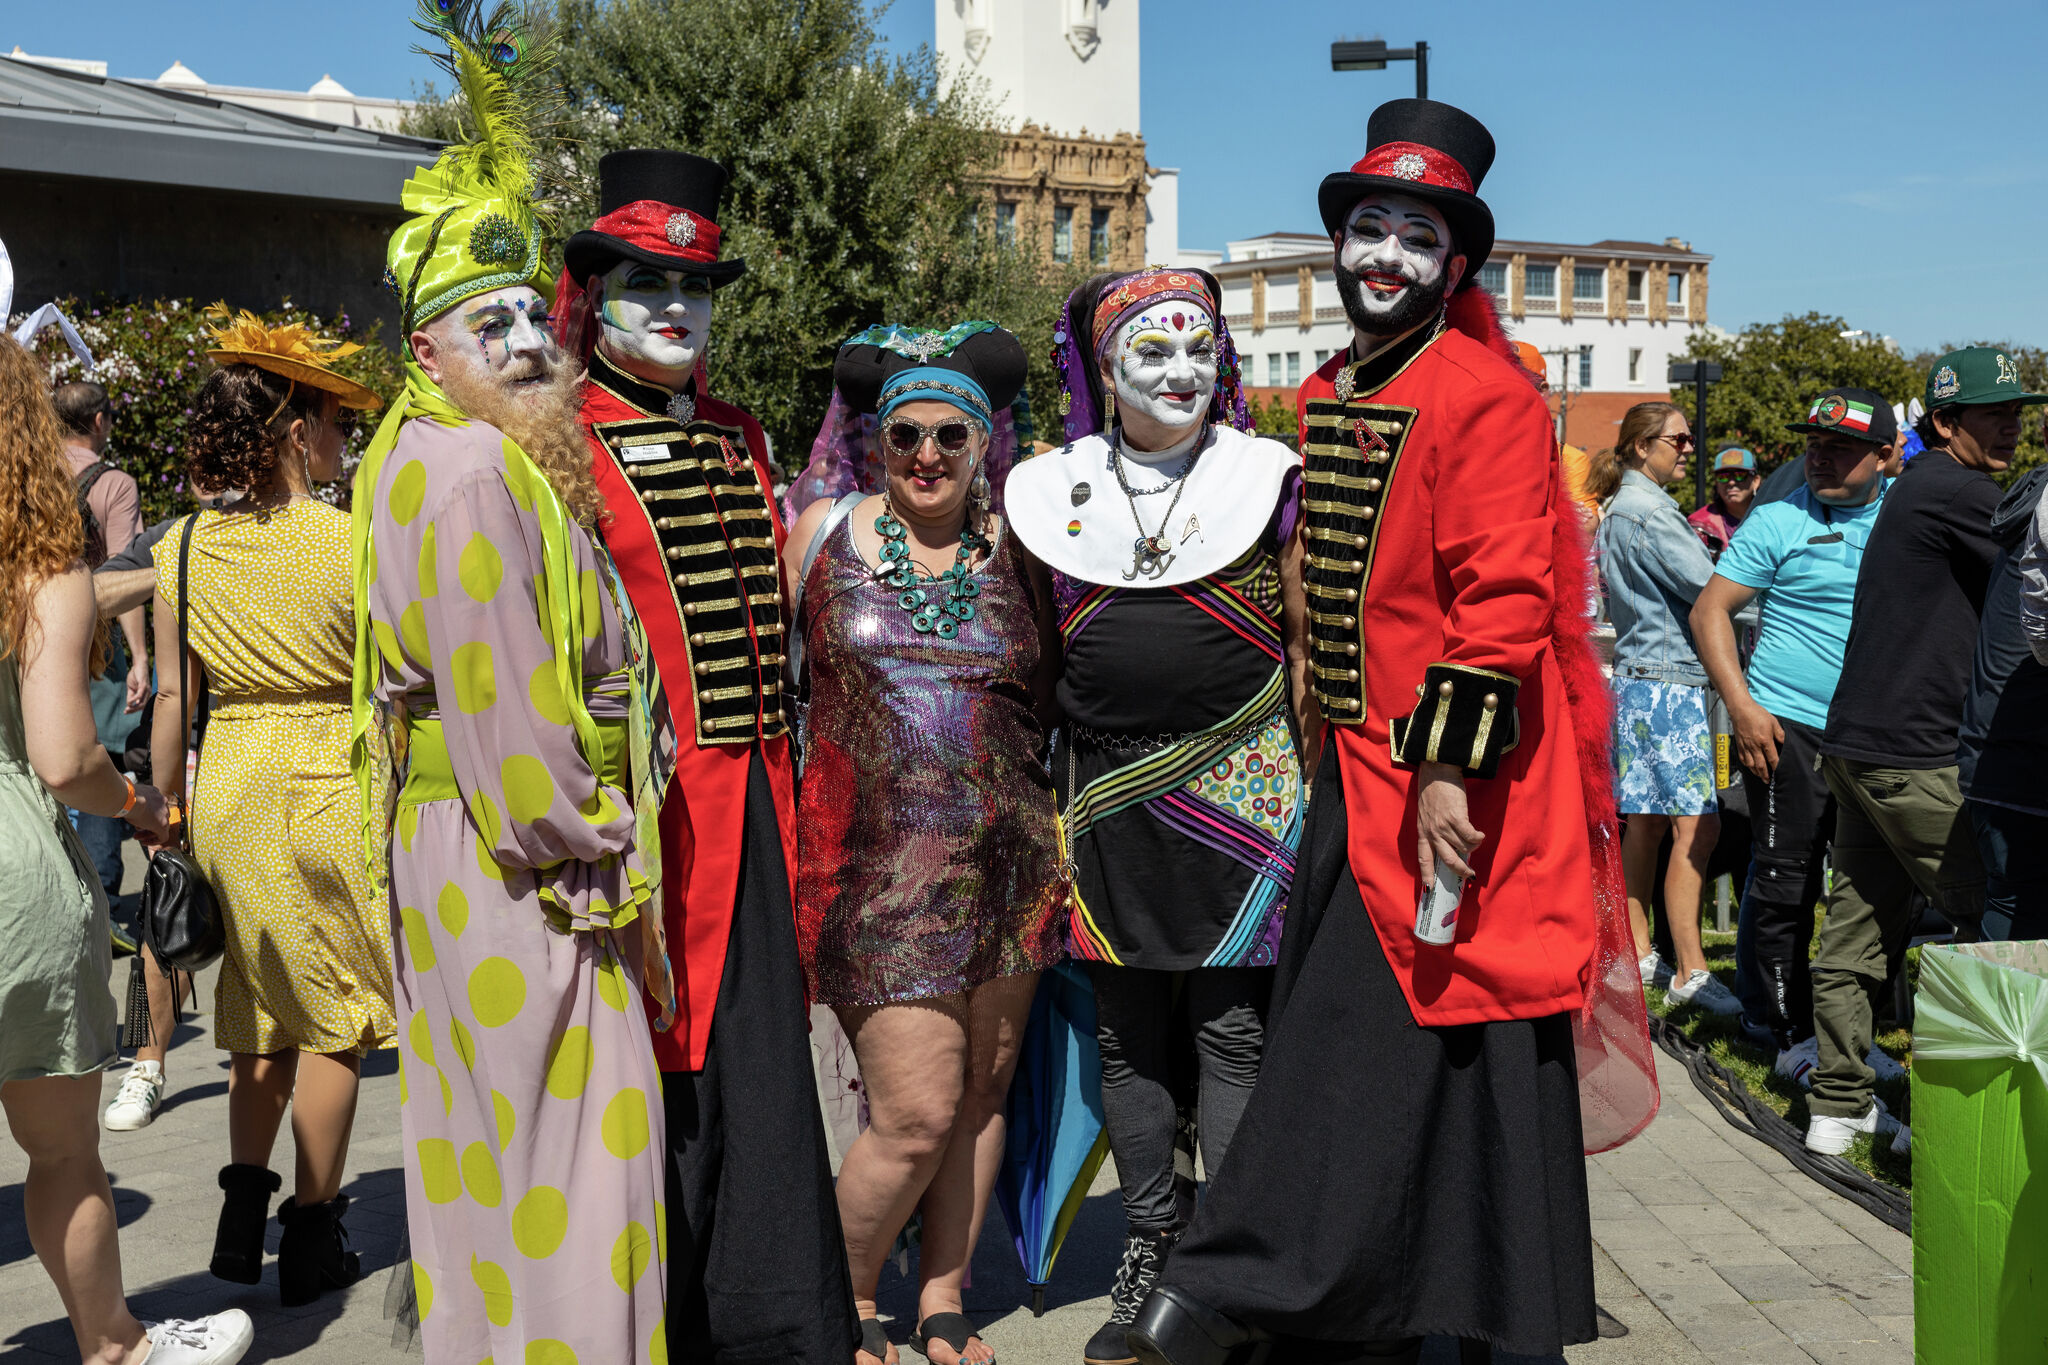 Dodgers' Sisters of Perpetual Indulgence event draws thousands of